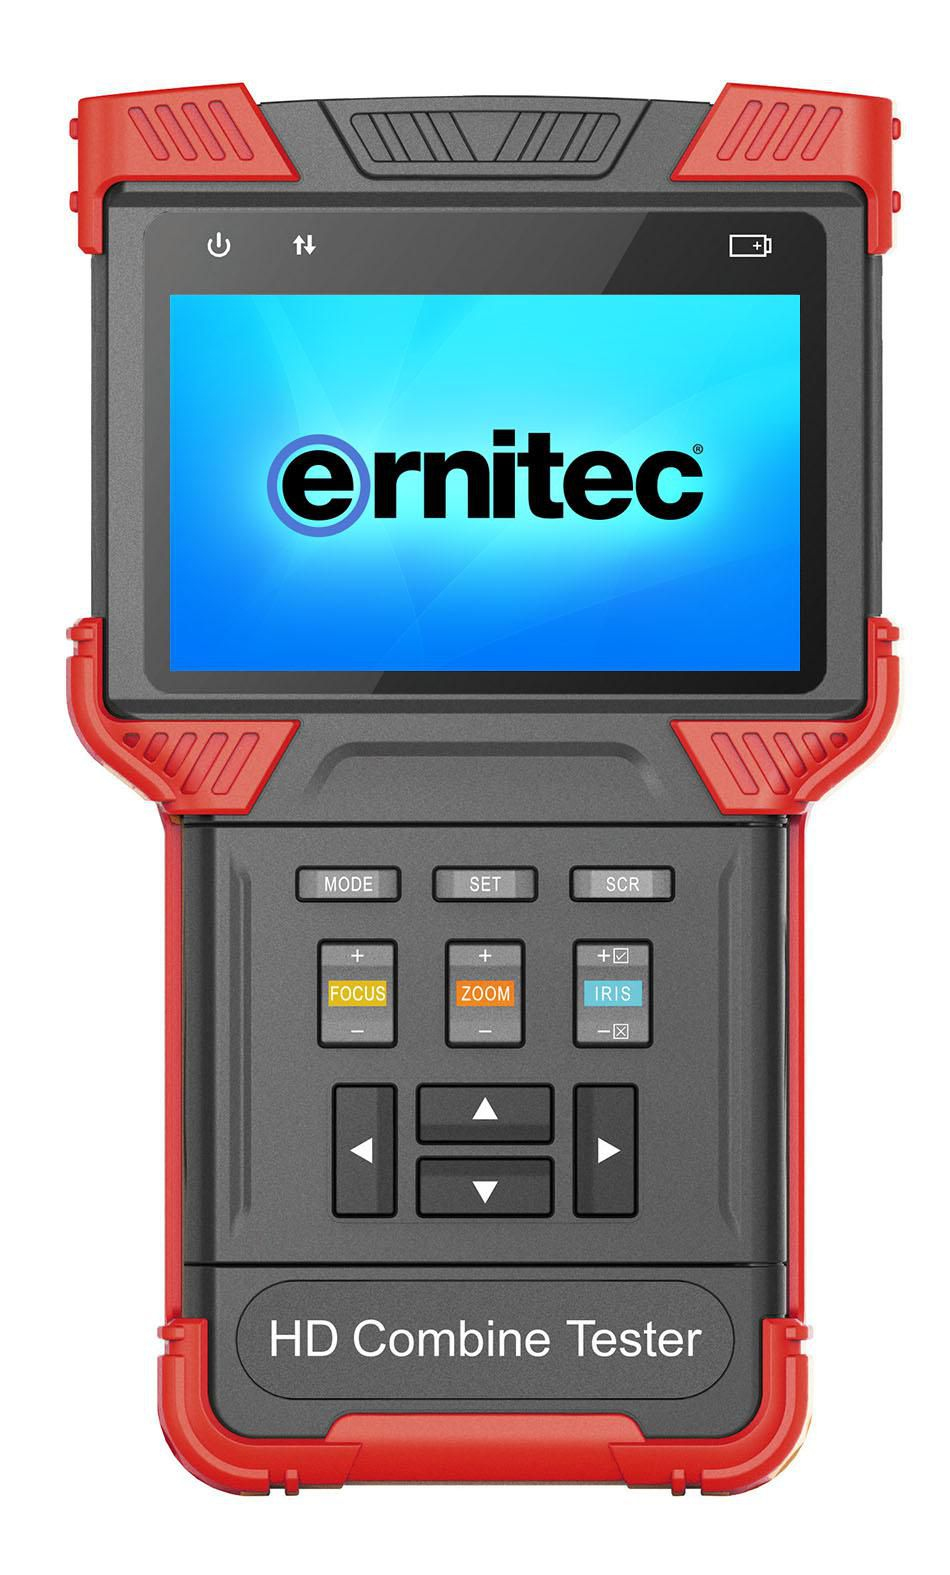 Ernitec 4 Touch Screen Test Monitor,